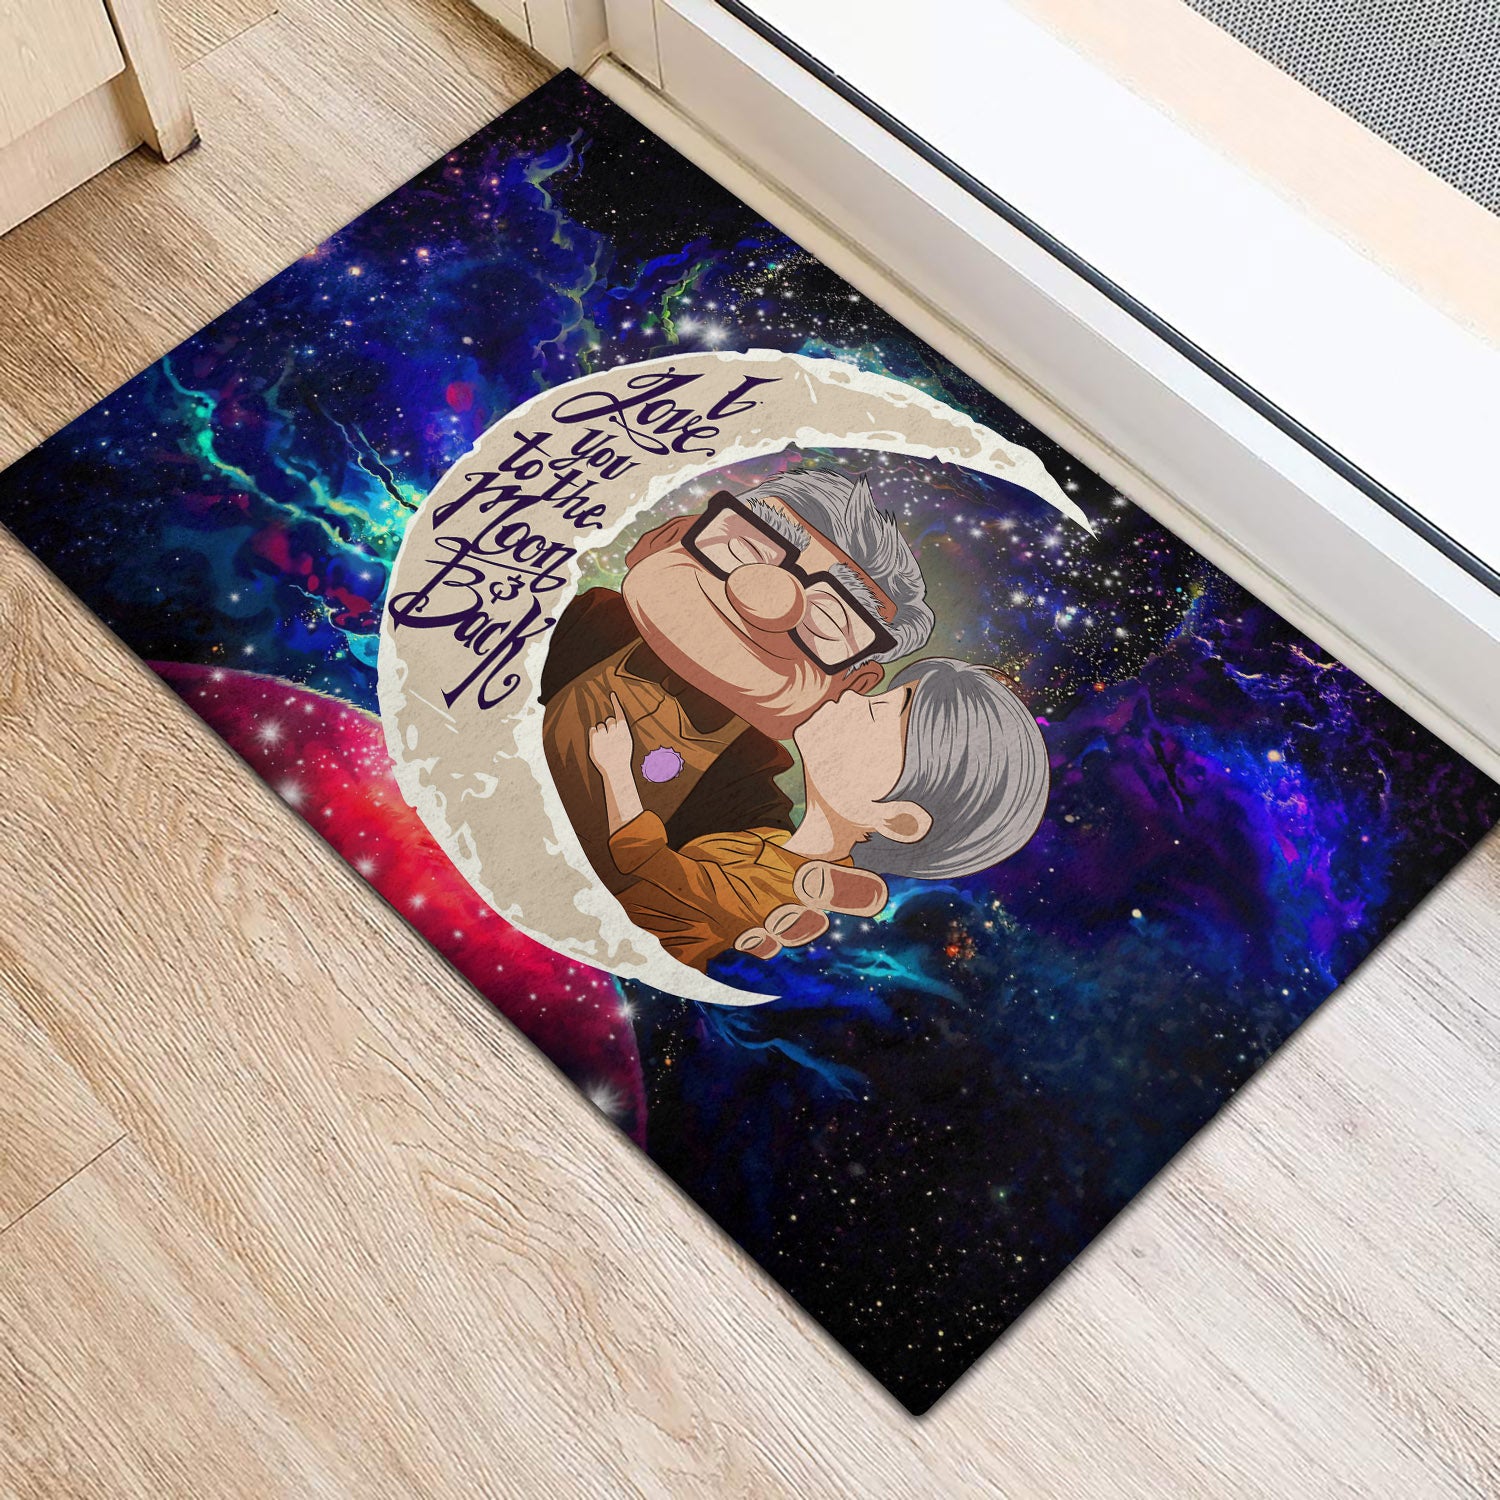 Up Couple Love You To The Moon Galaxy Back Door Mats Home Decor